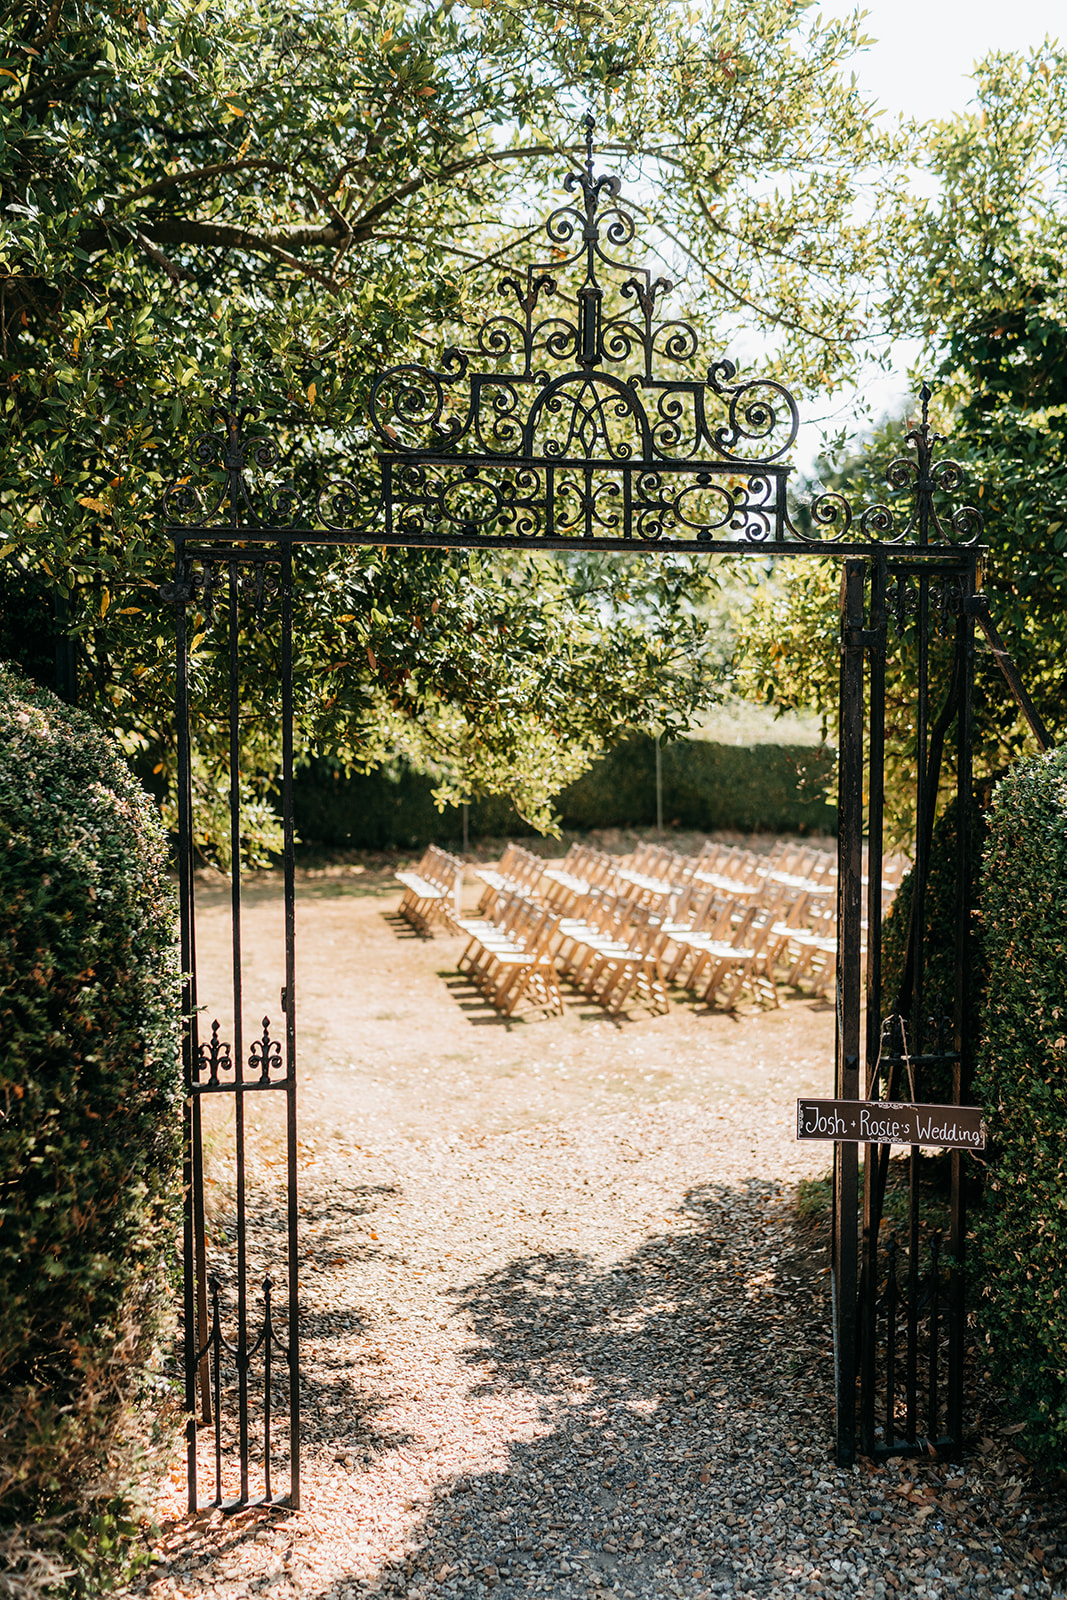 A glimpse of the outdoor wedding ceremony through iron gates and trees